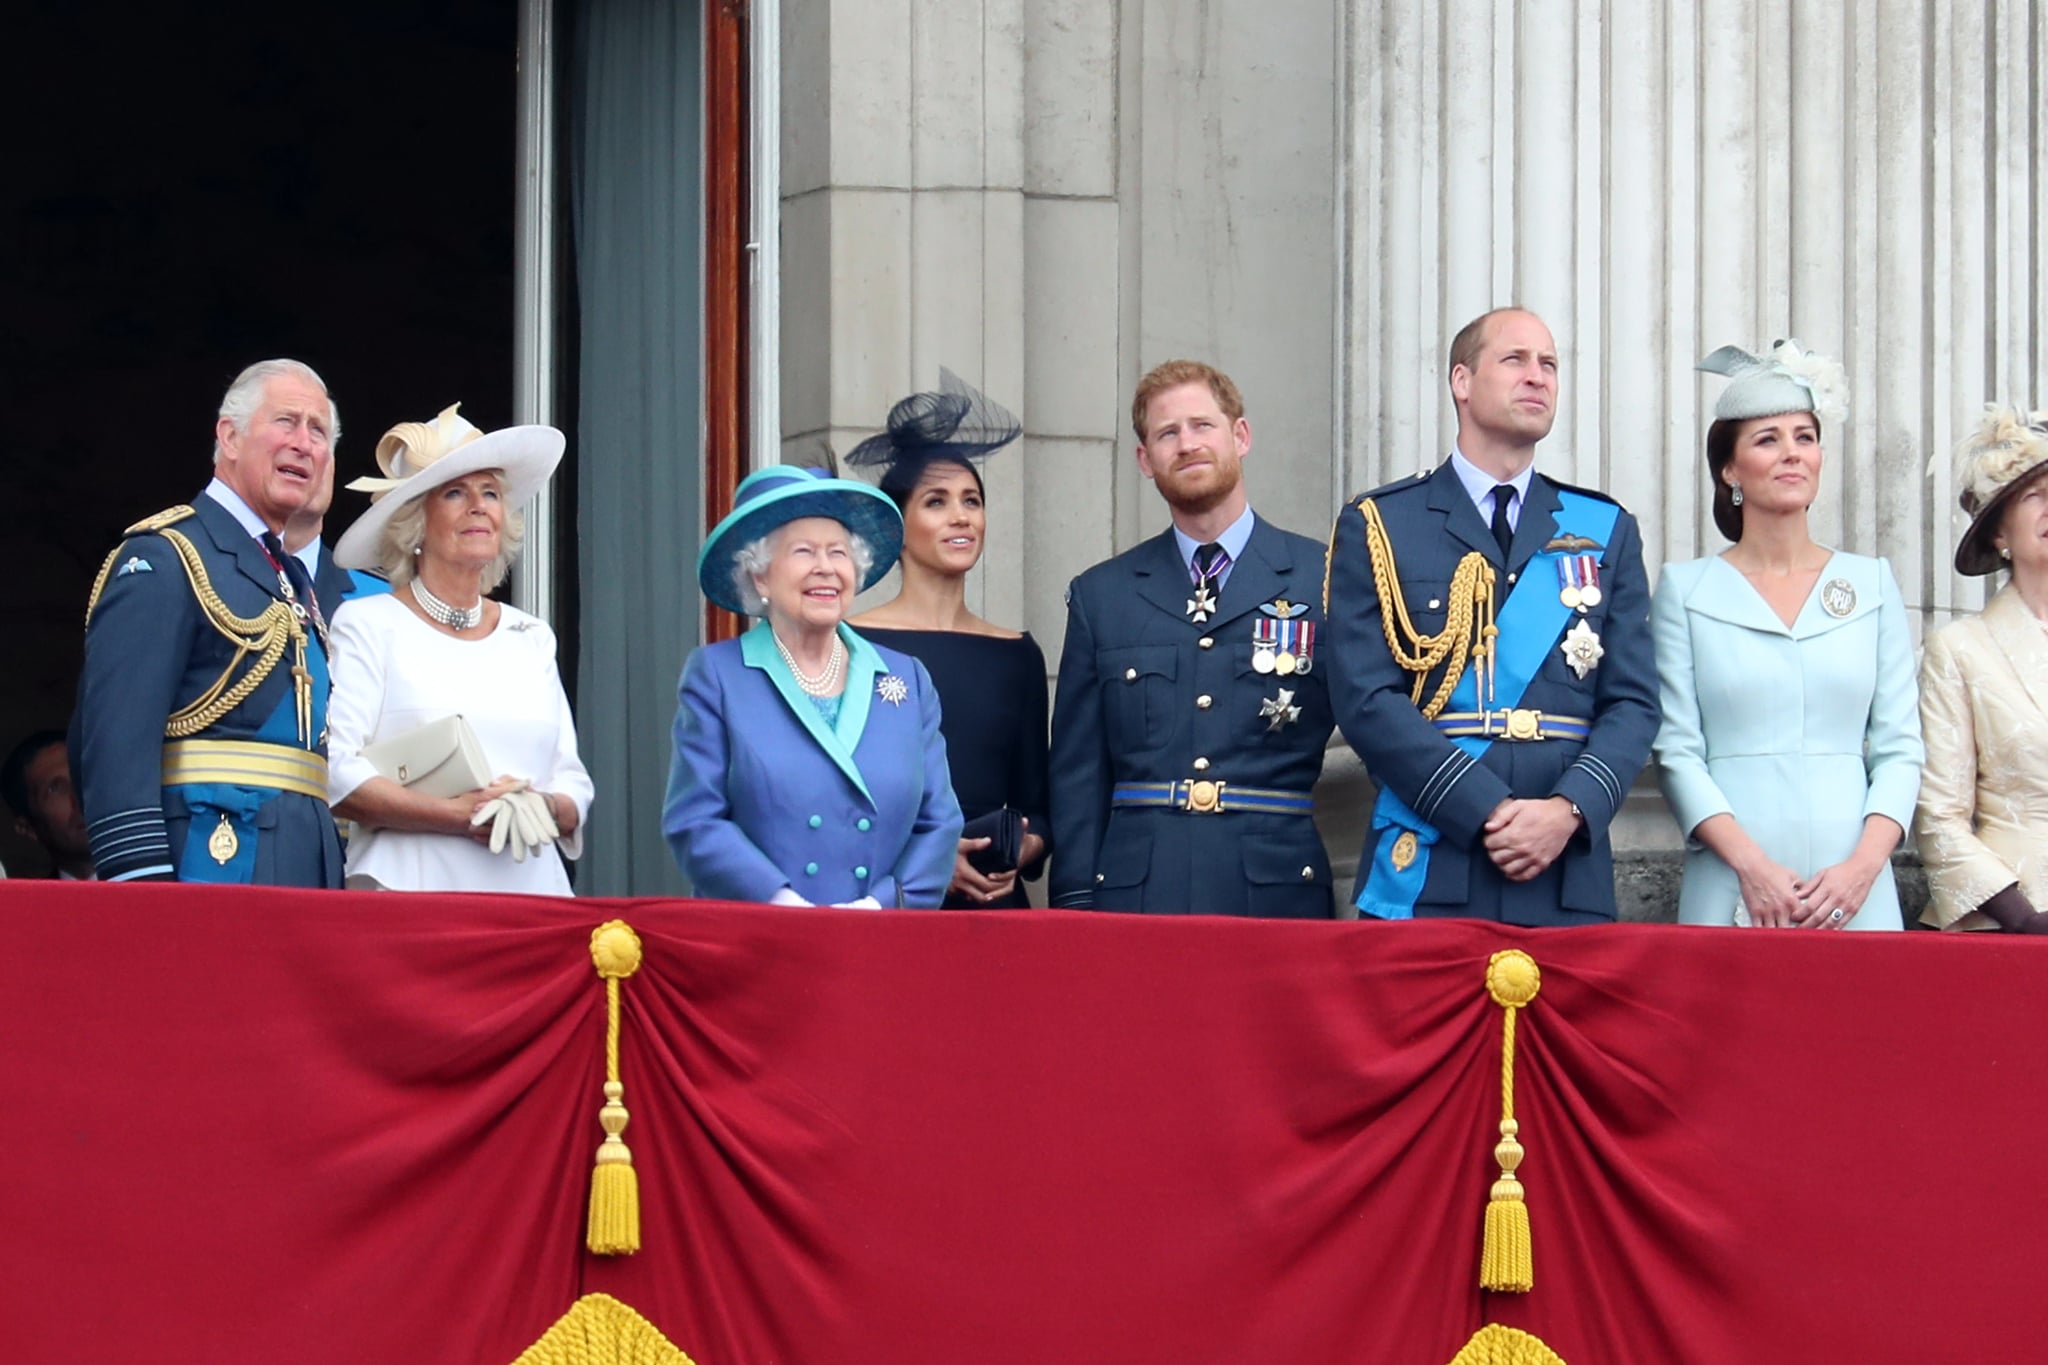 Queen Elizabeth II with her family at the centenary of the RAF in 2018